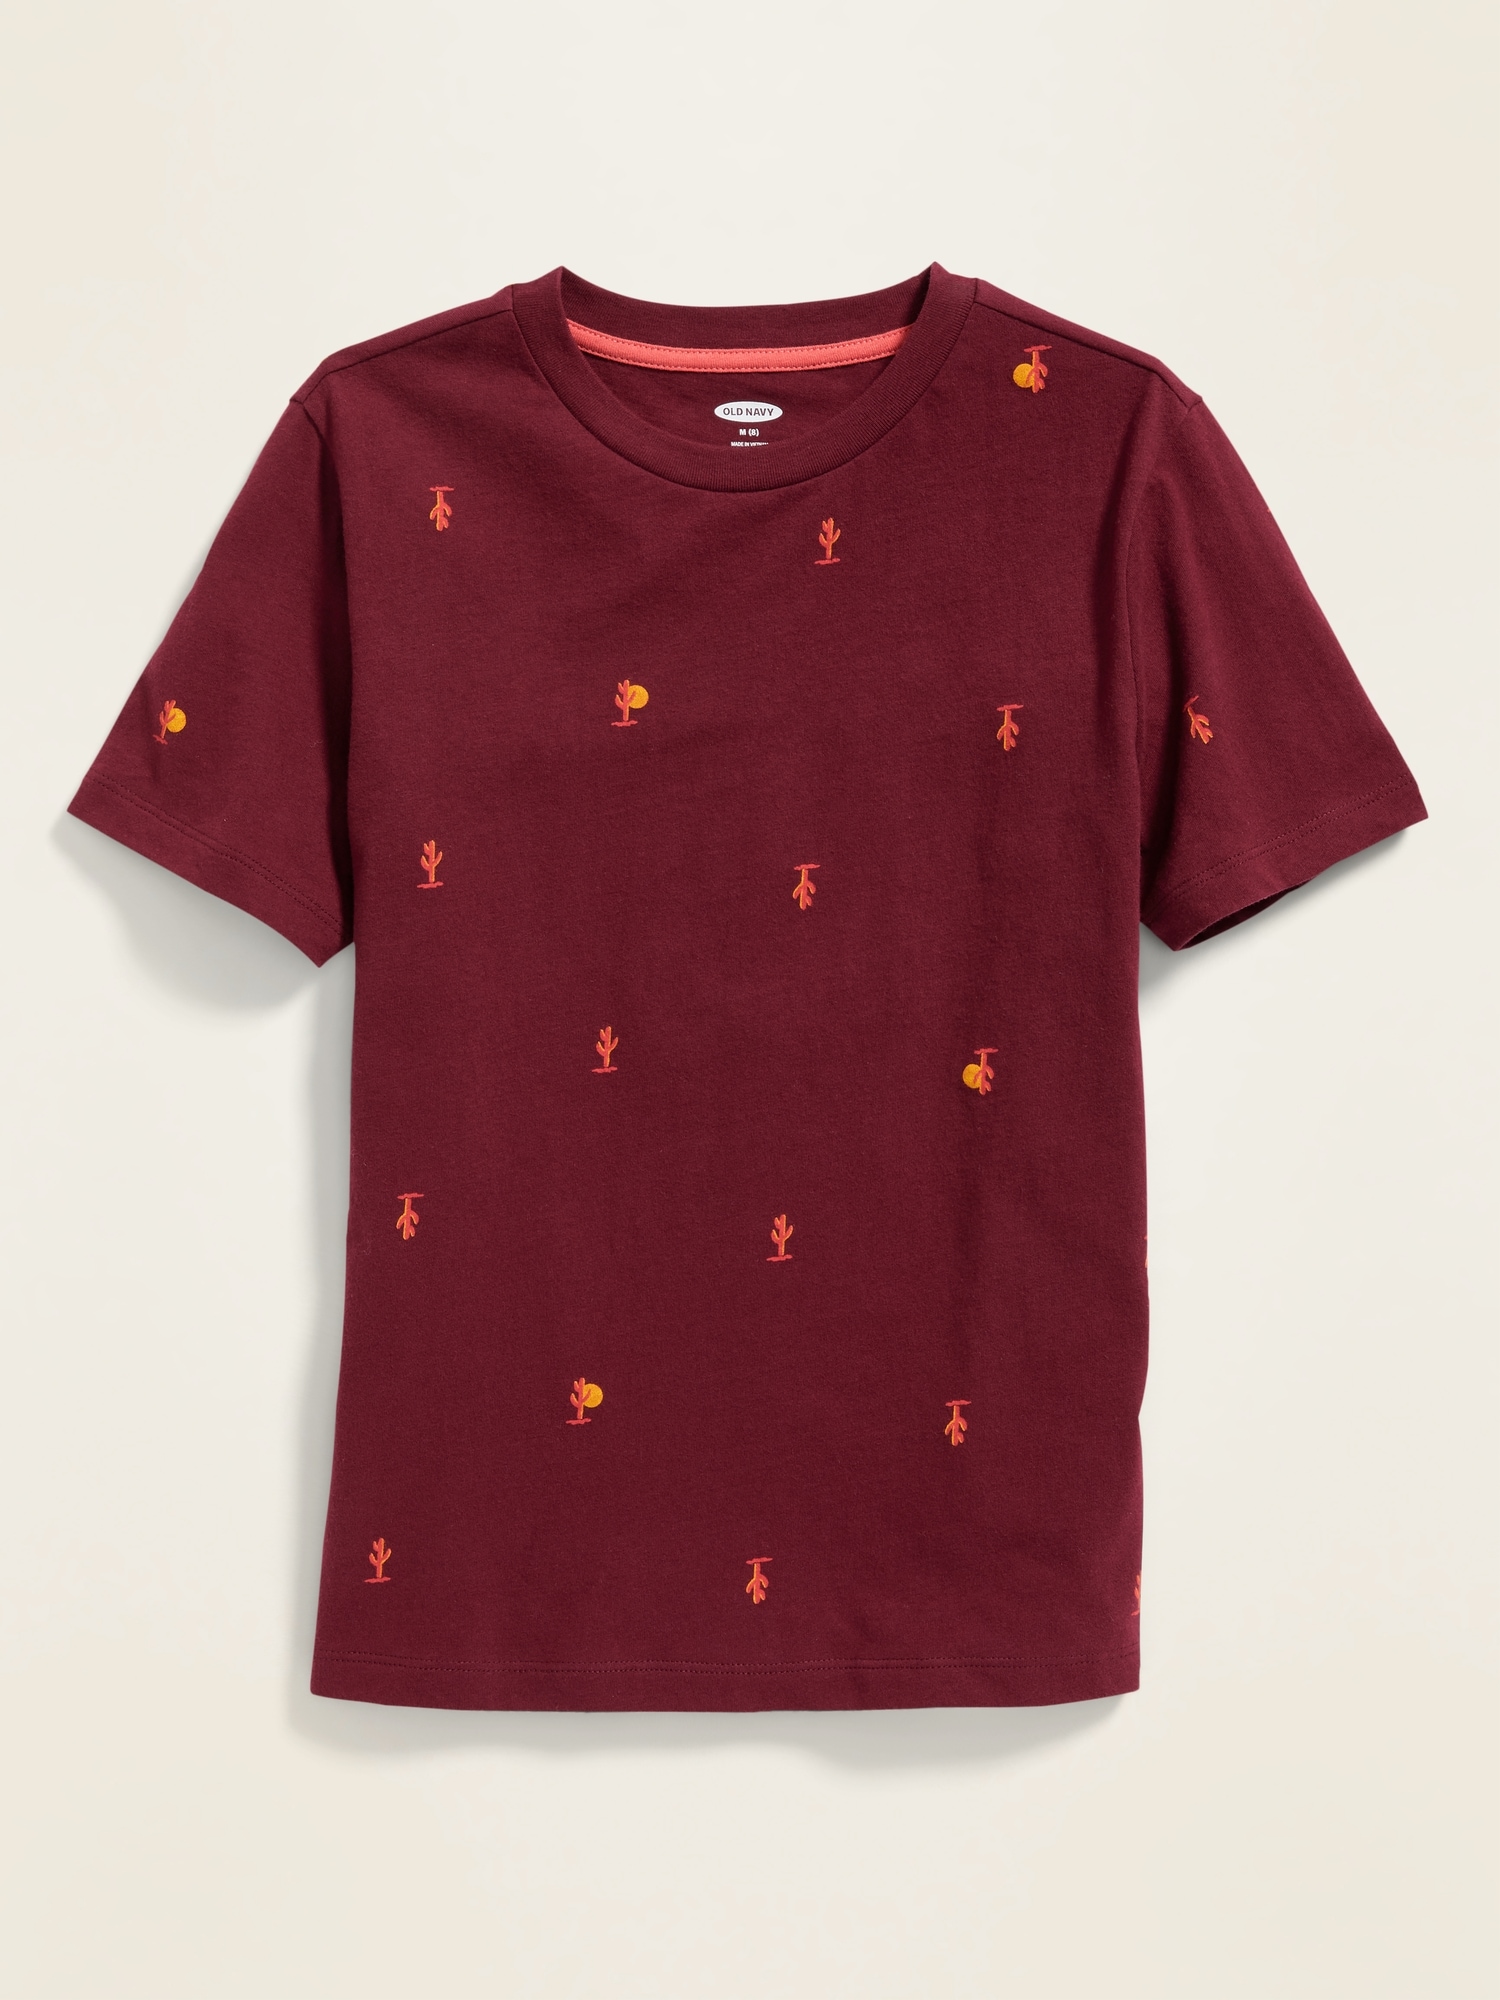 Softest Printed Crew-Neck Tee For Boys | Old Navy